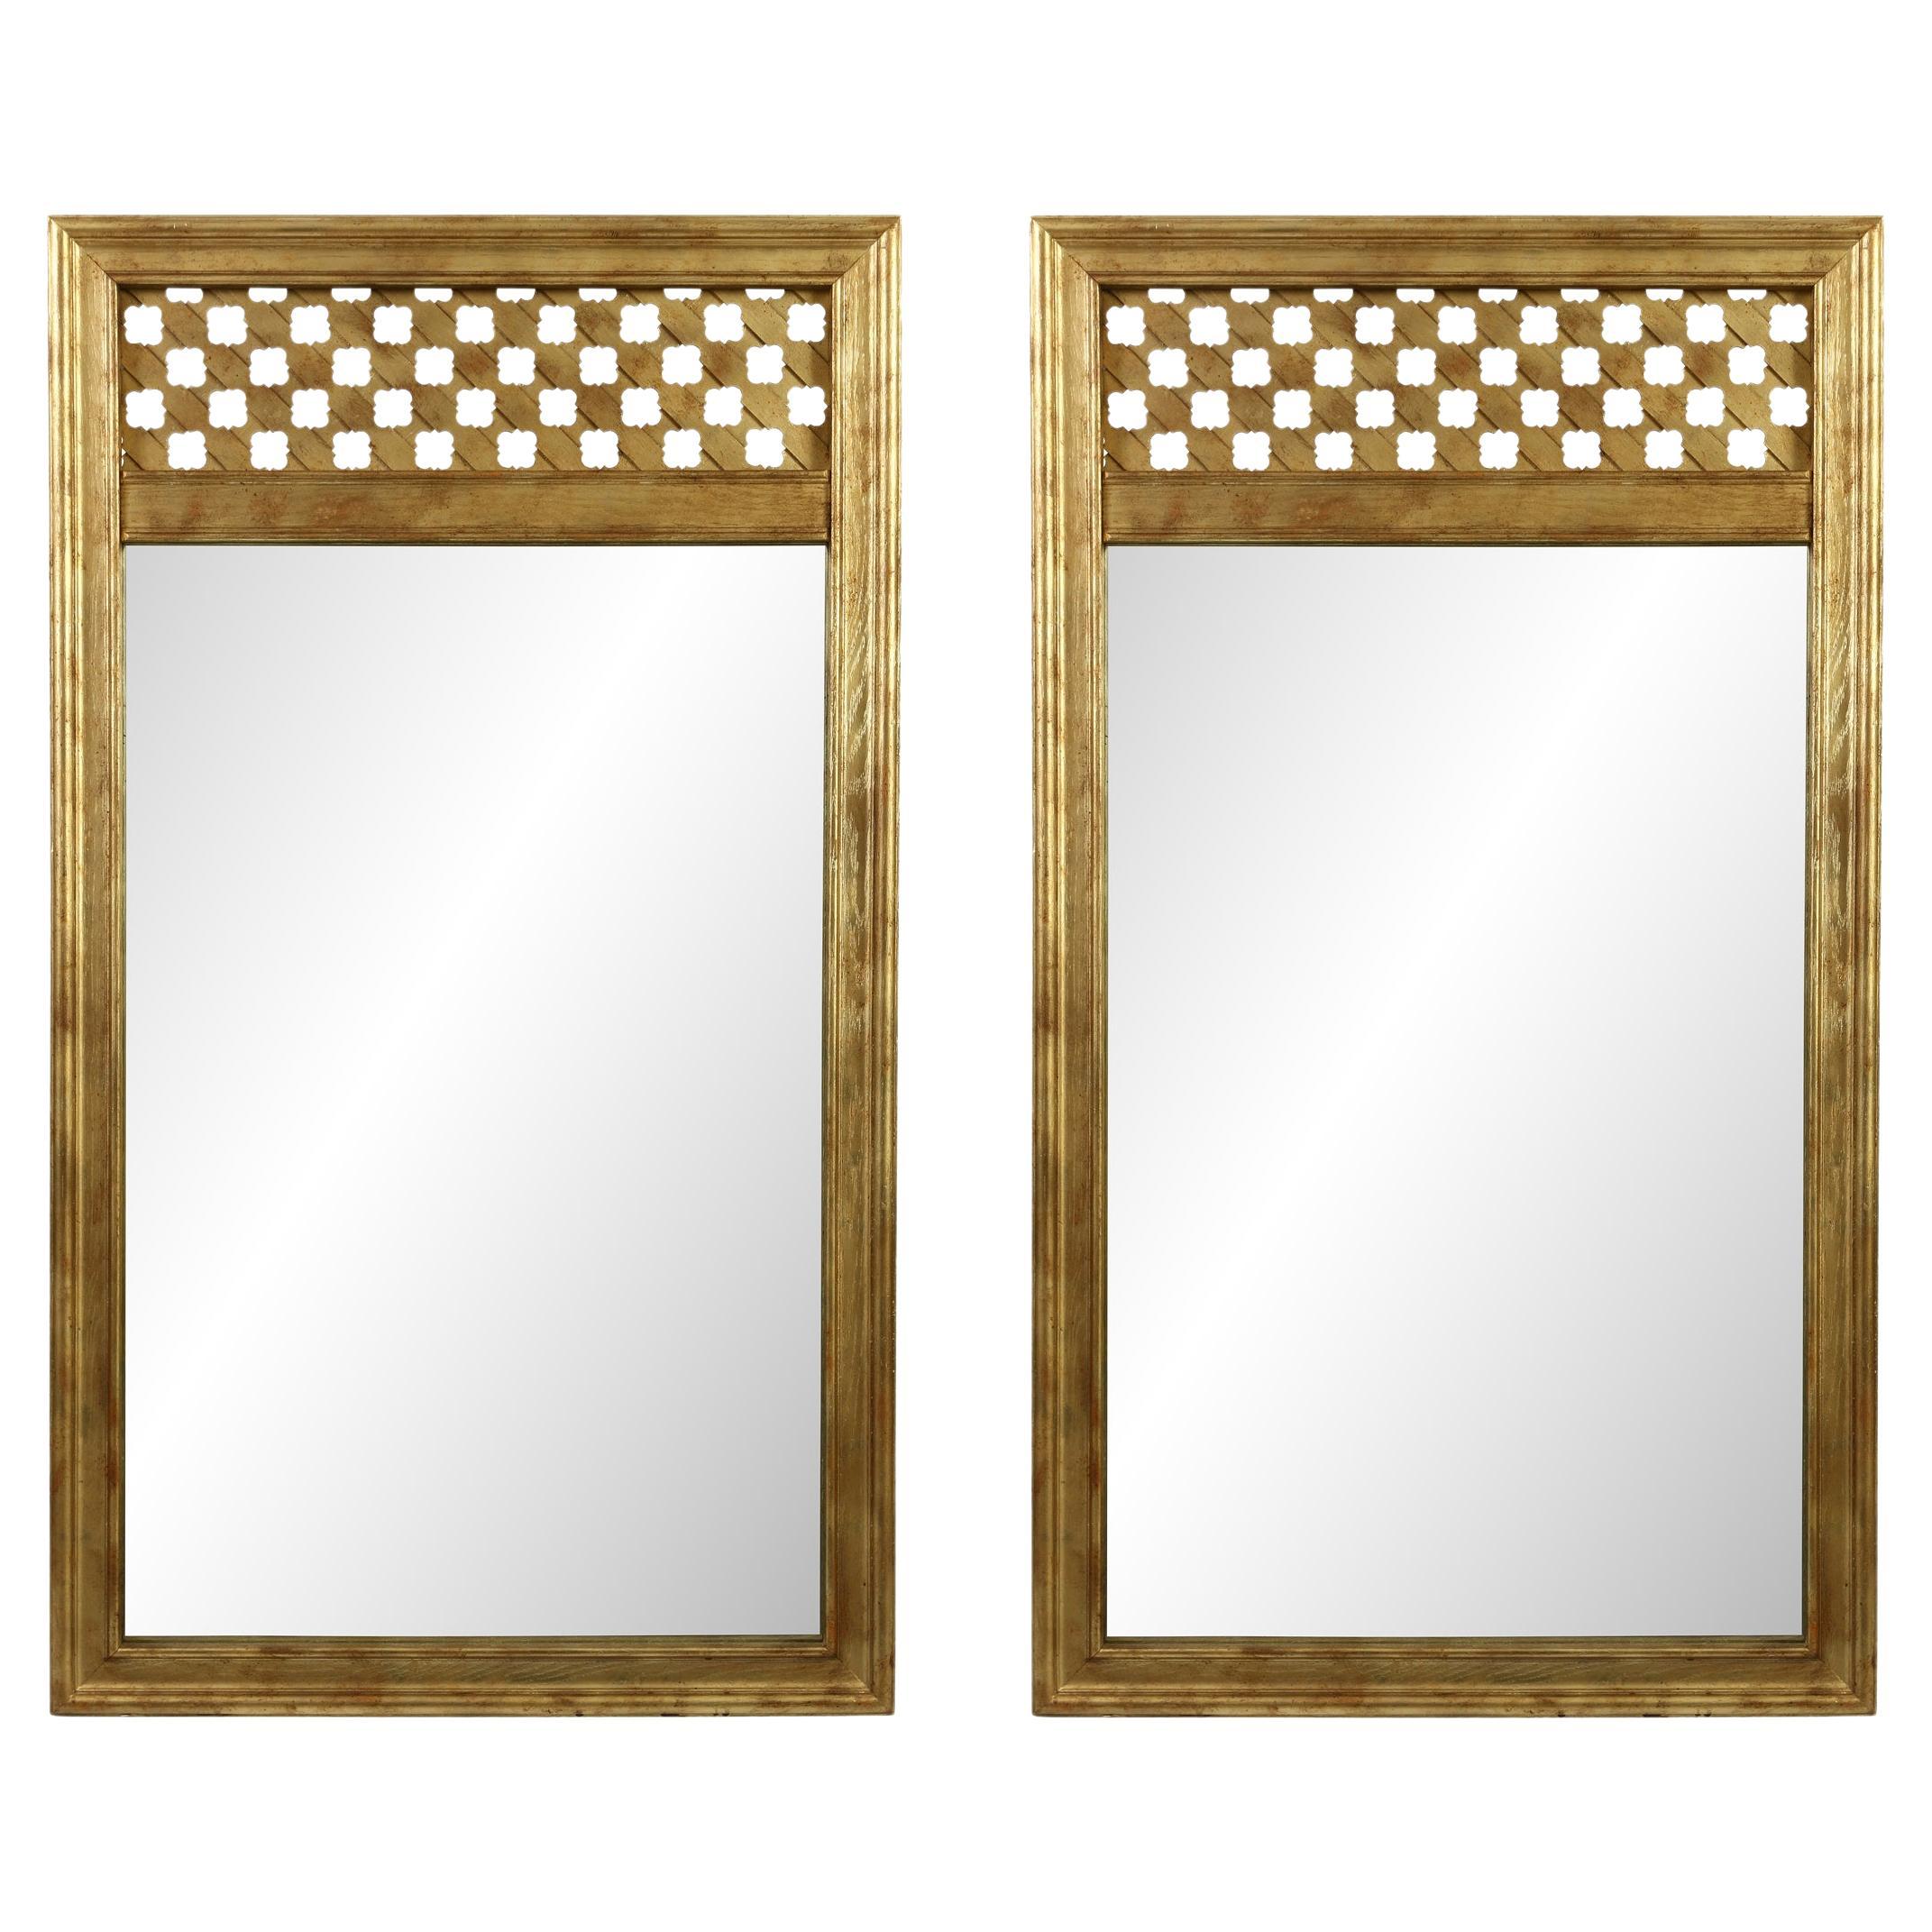 A Pair of Tall Gold Mirrors